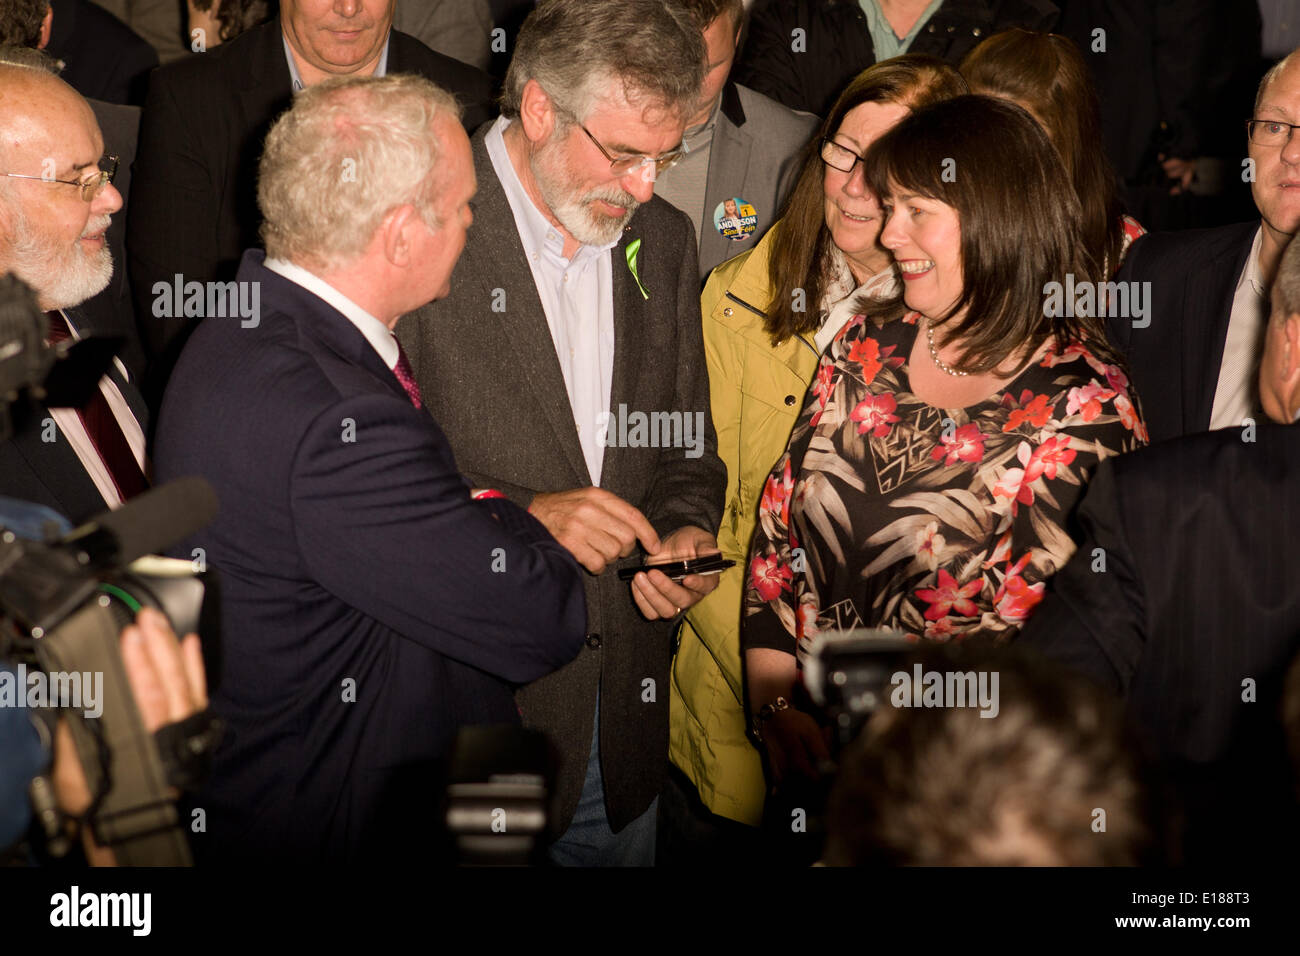 Belfast, UK. 26th May, 2014. Gerry Adams Texting with Martin McGuinness and Michelle Gildernew at European Election Results in Belfast Credit:  Bonzo/Alamy Live News Stock Photo